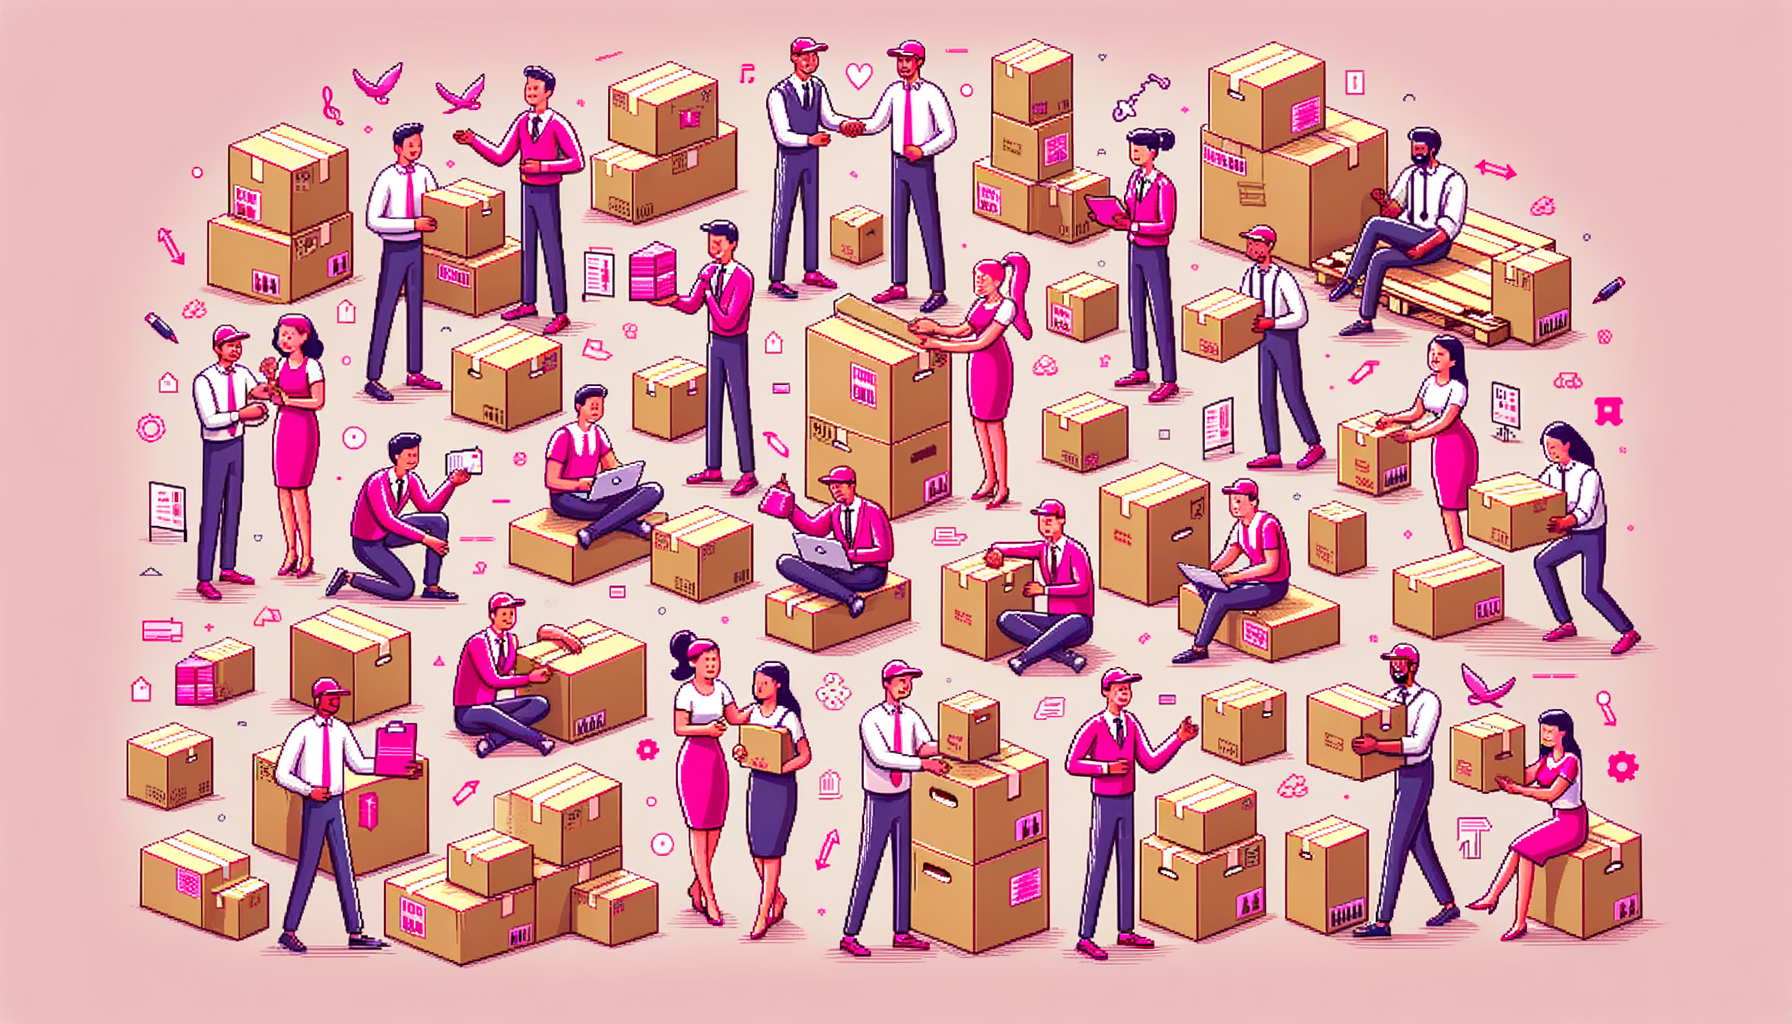 Fuchsia-colored illustrated scene depicting brokers organizing a moving process, with happy cartoon characters and moving boxes, symbolizing the role of brokers in making moving seamless.